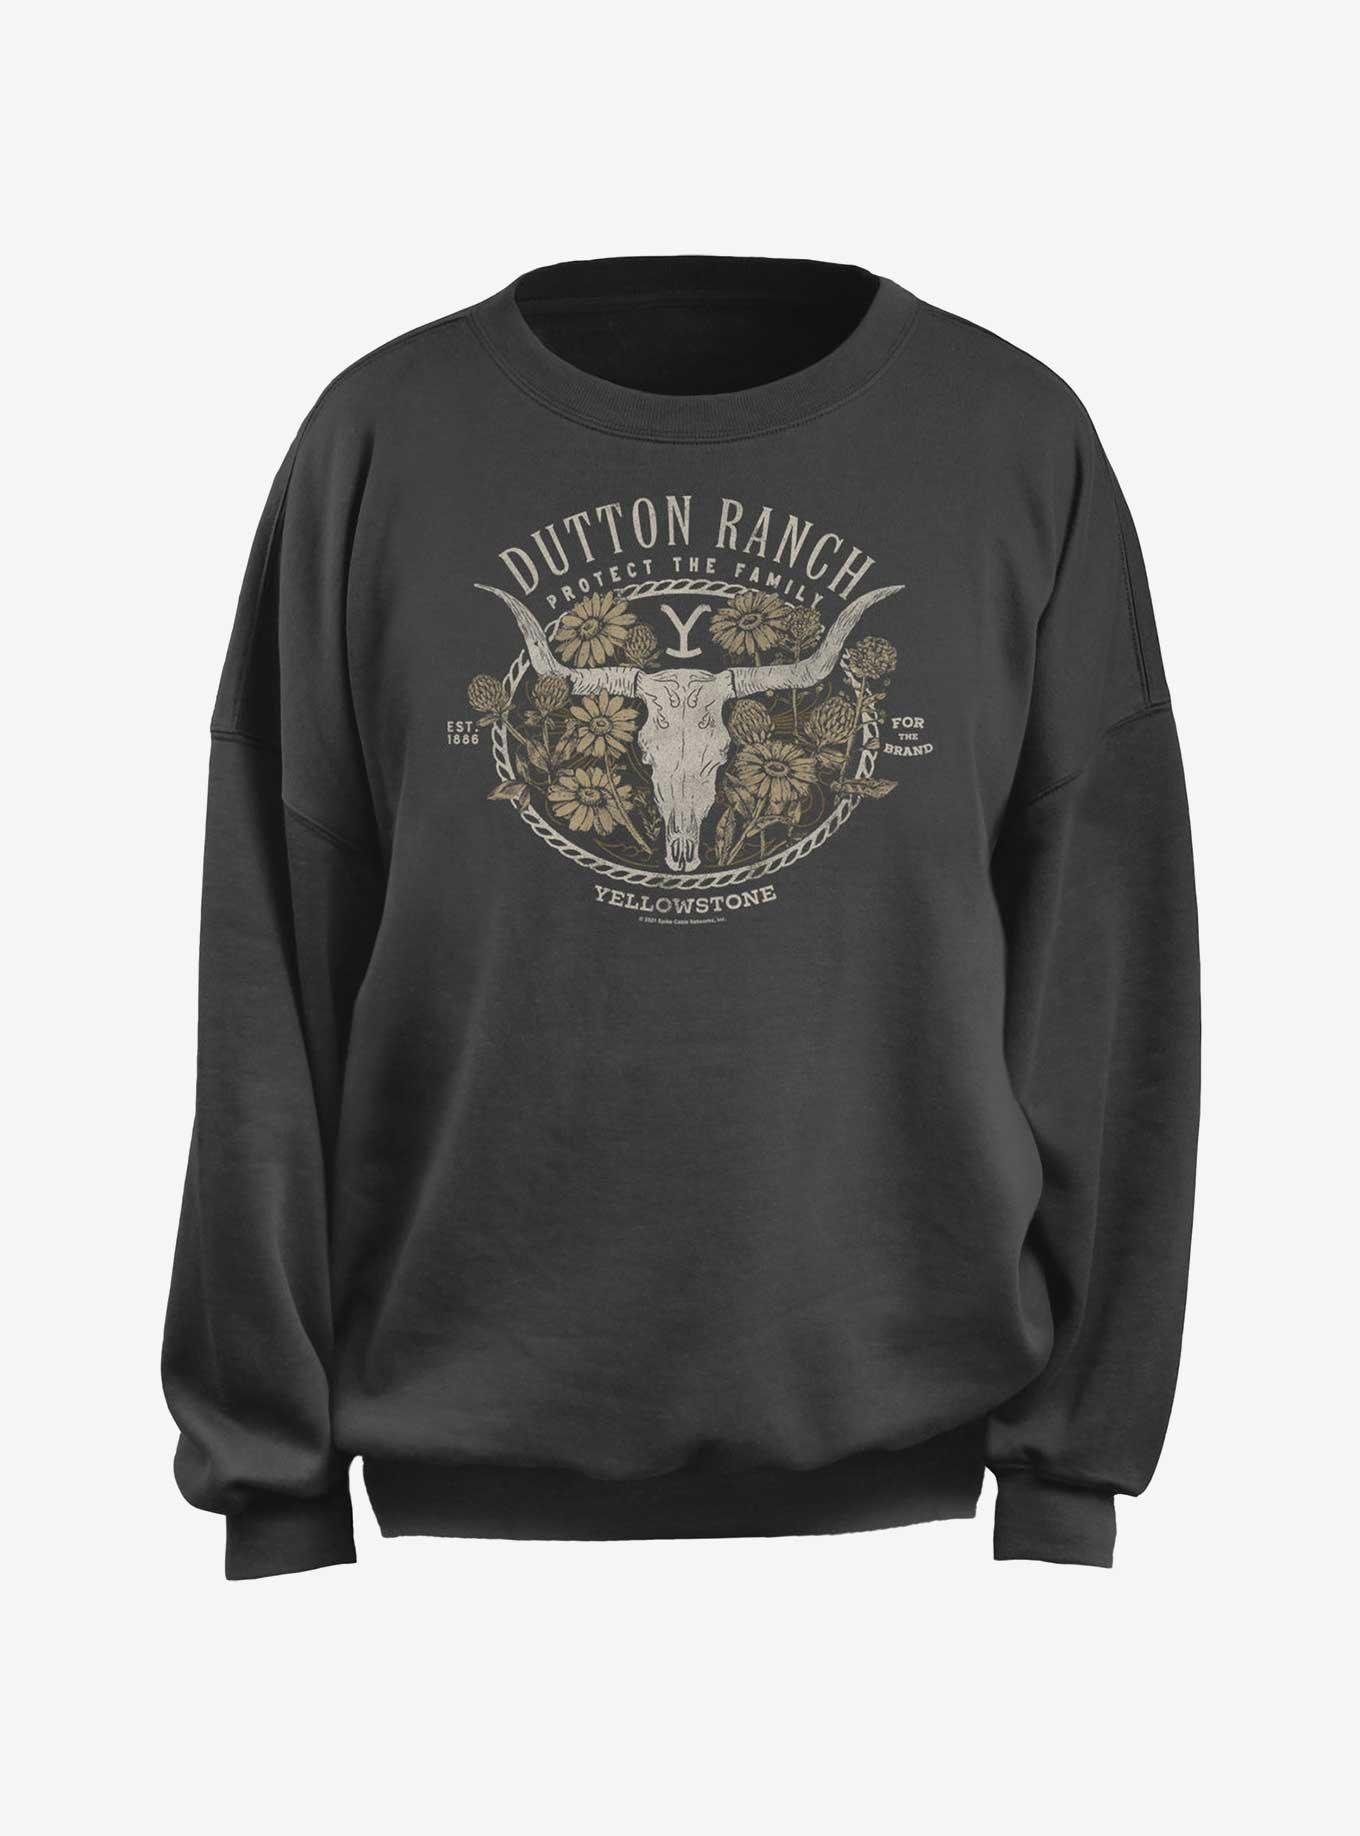 Yellowstone Dutton Ranch Floral Girls Oversized Sweatshirt, CHARCOAL, hi-res